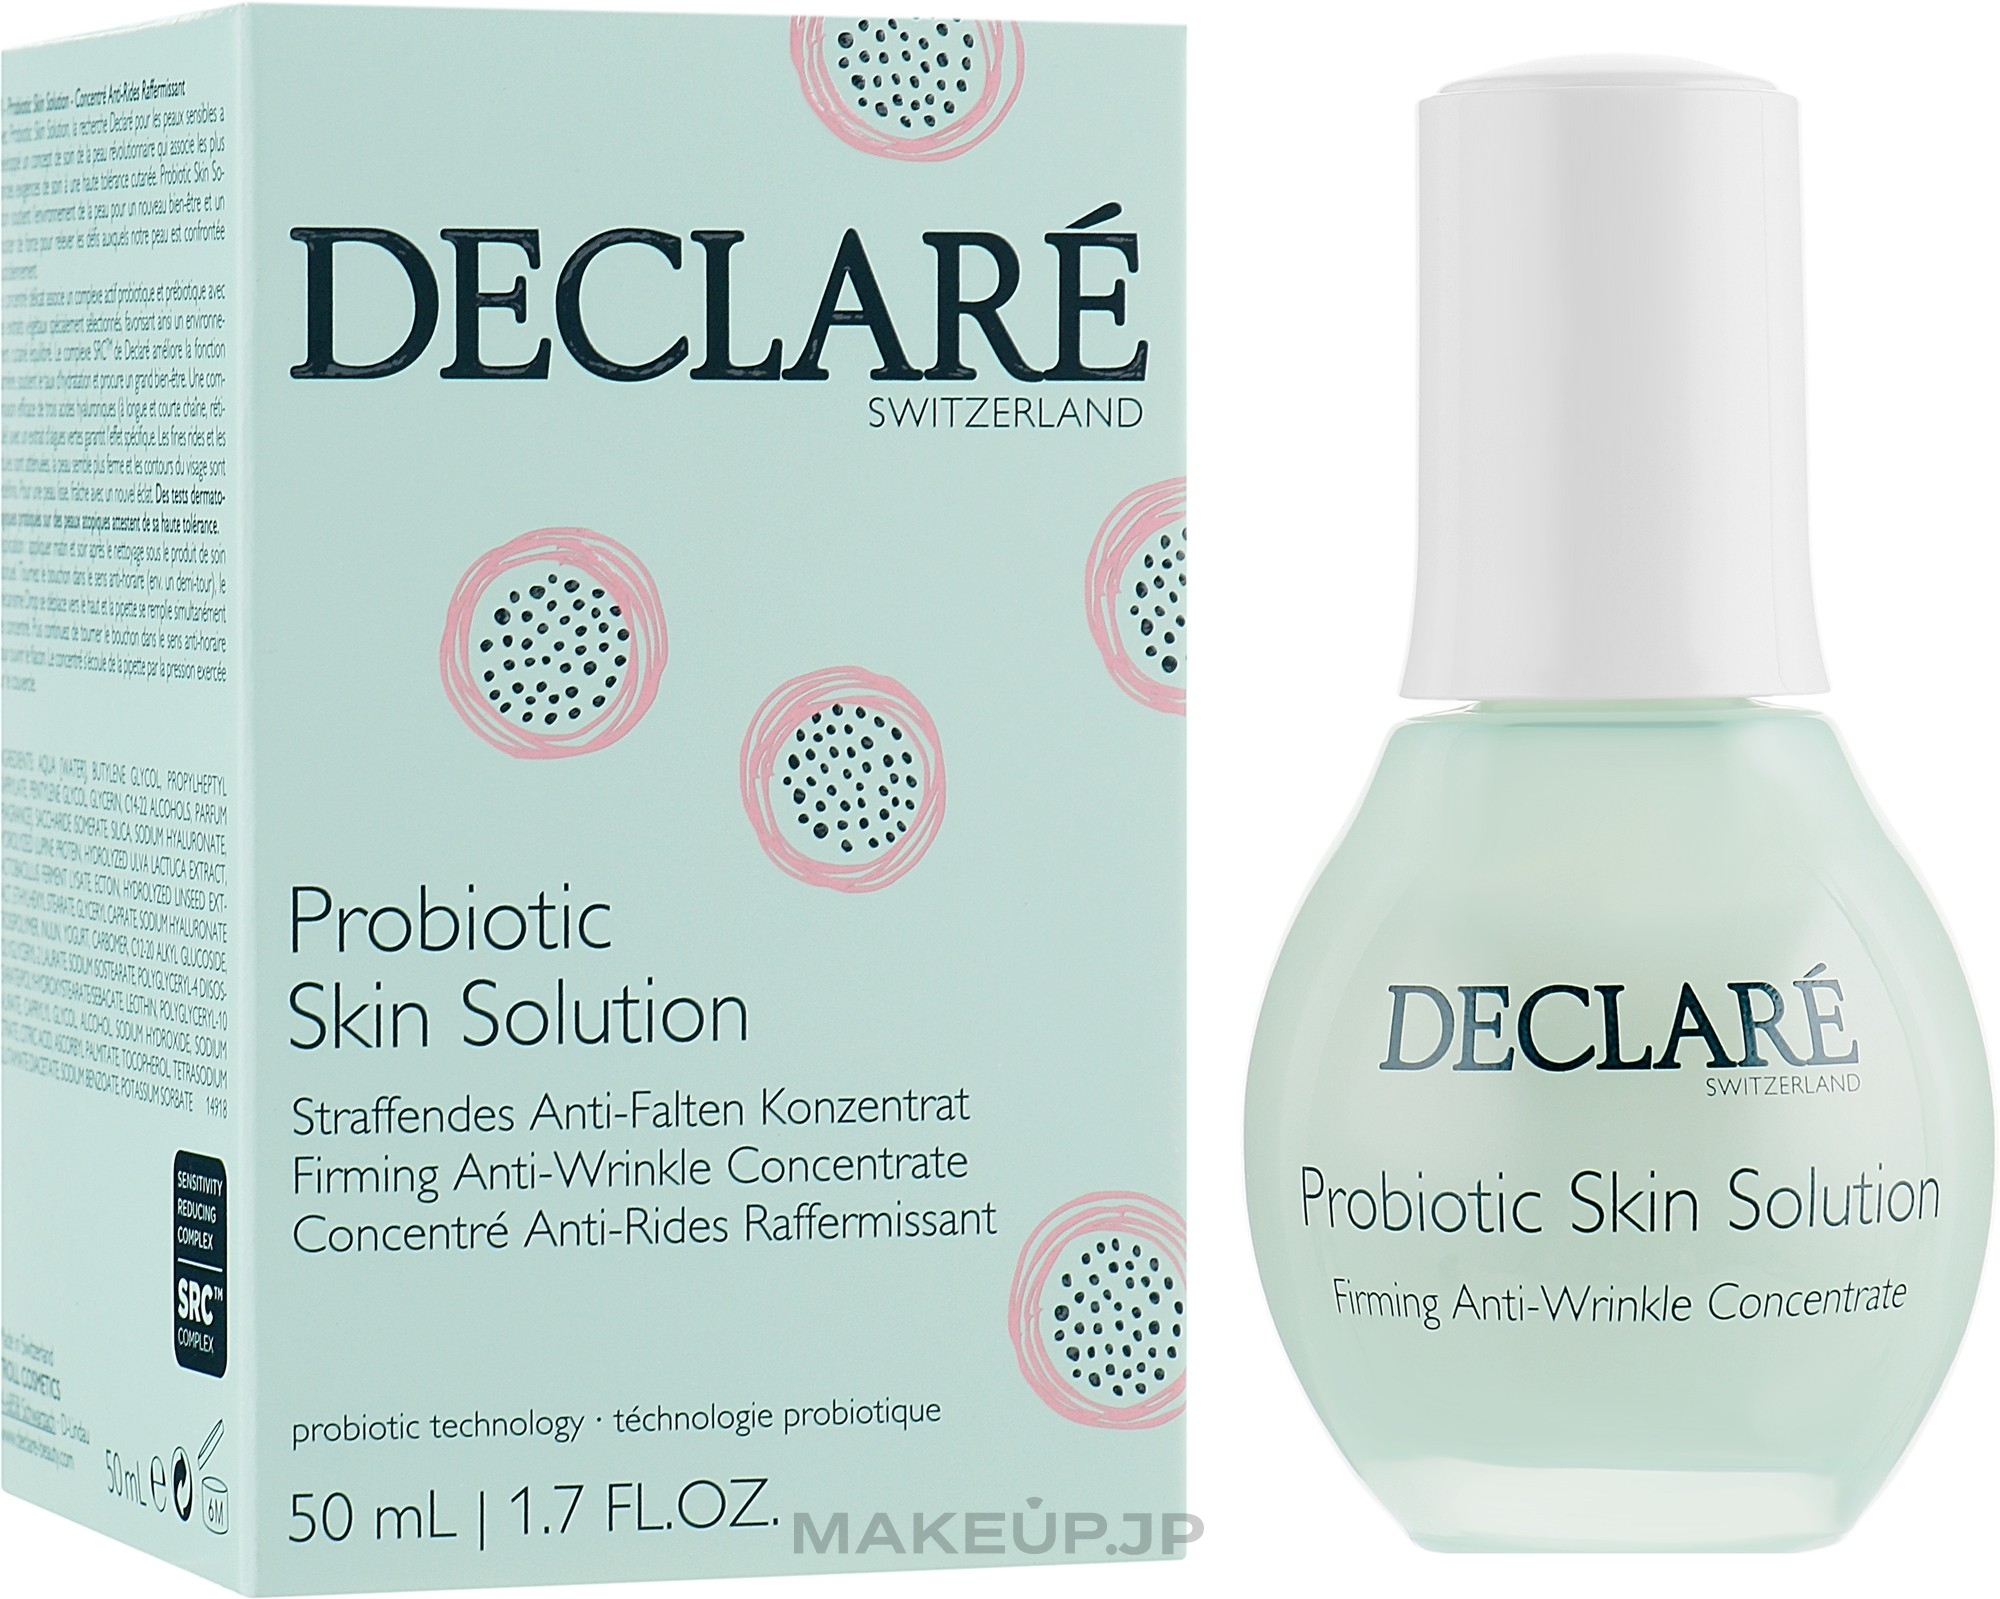 Anti-Wrinkle Probiotic Lifting Concentrate - Declare Probiotic Skin Solution Firming Anti-Wrinkle Concentrate — photo 50 ml